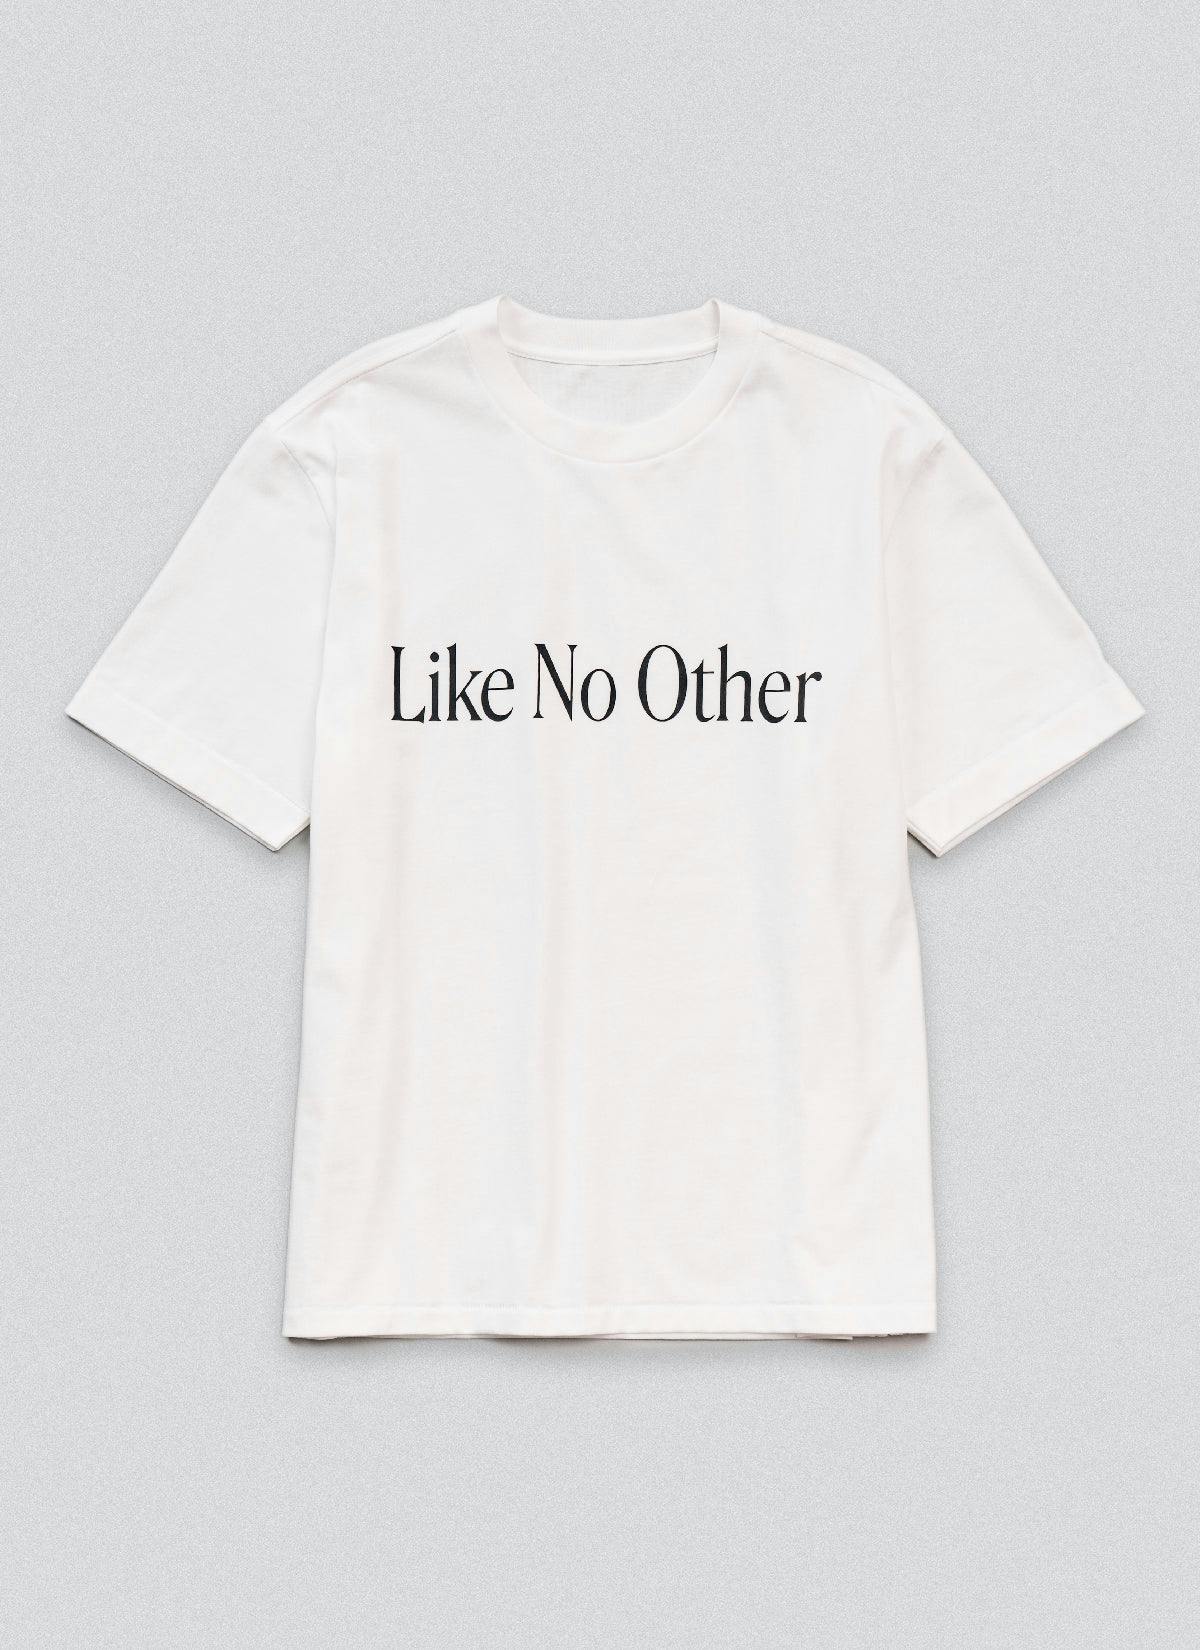 ˝Like No Other˝  T-Shirt White/ Black